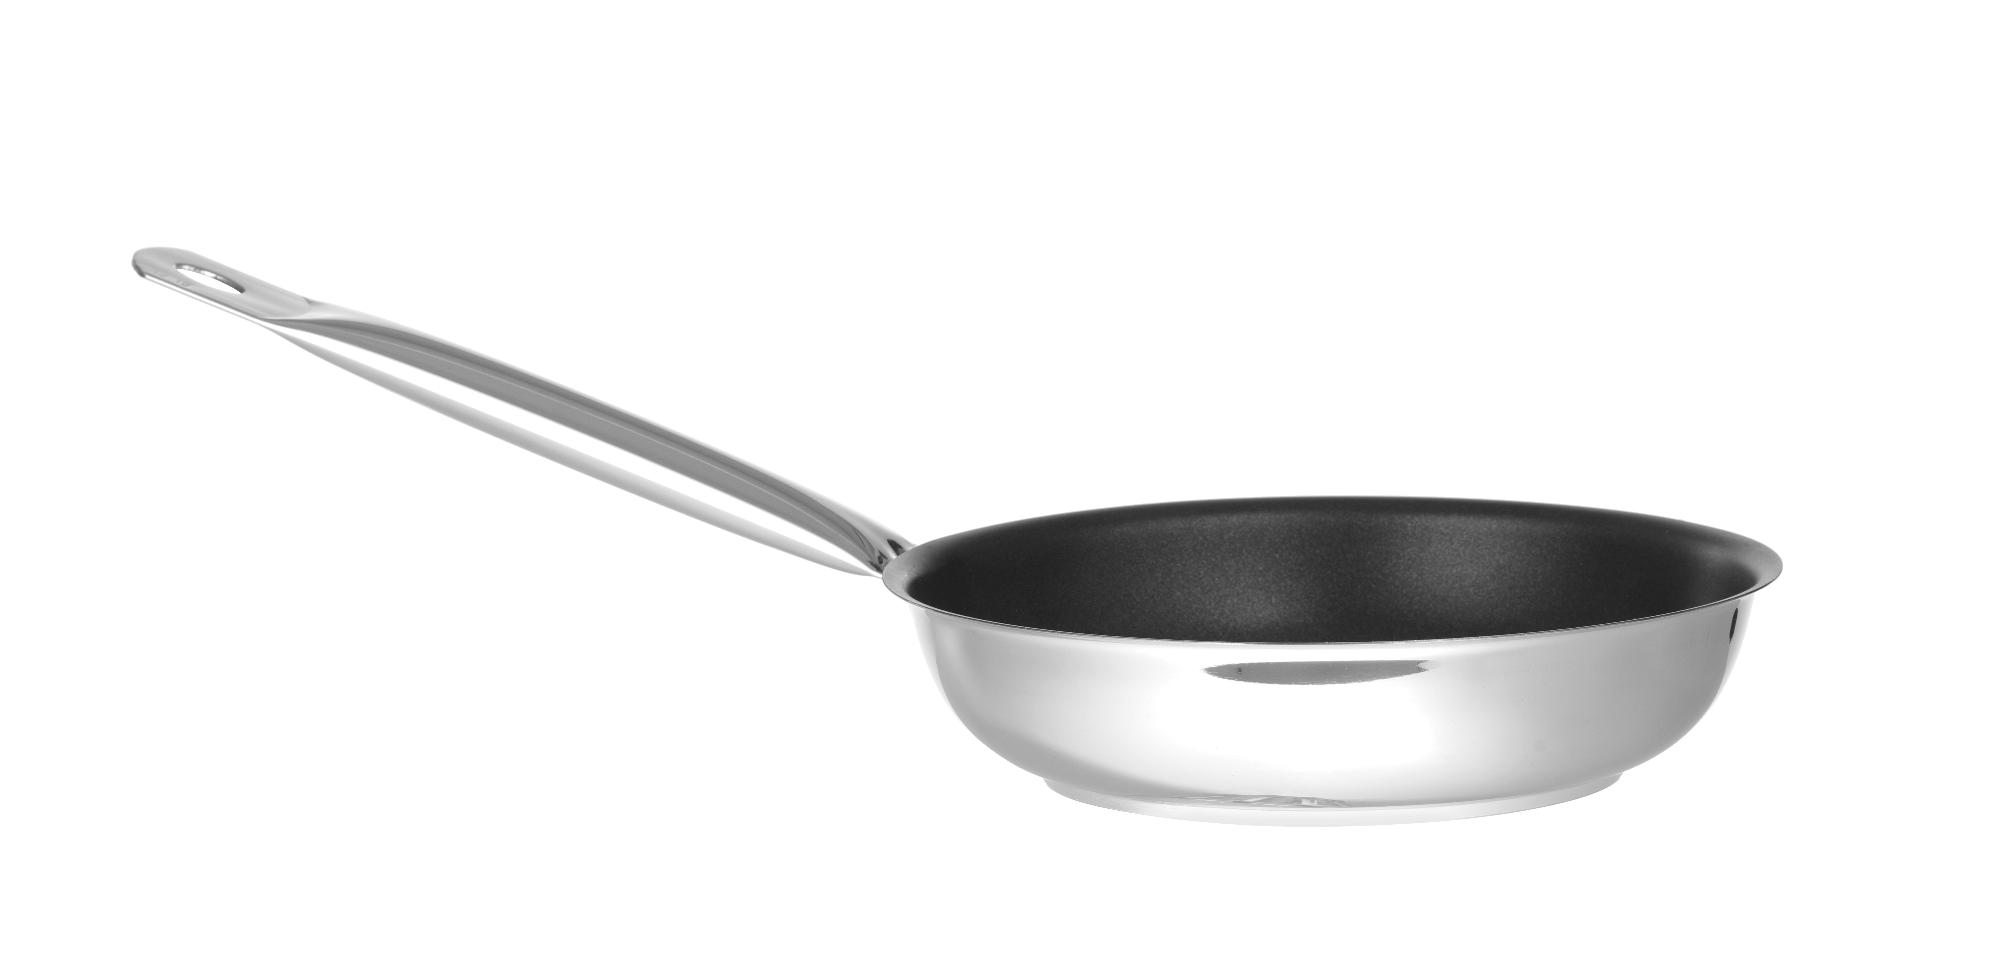 Non-stick coated frying pan, 400mm